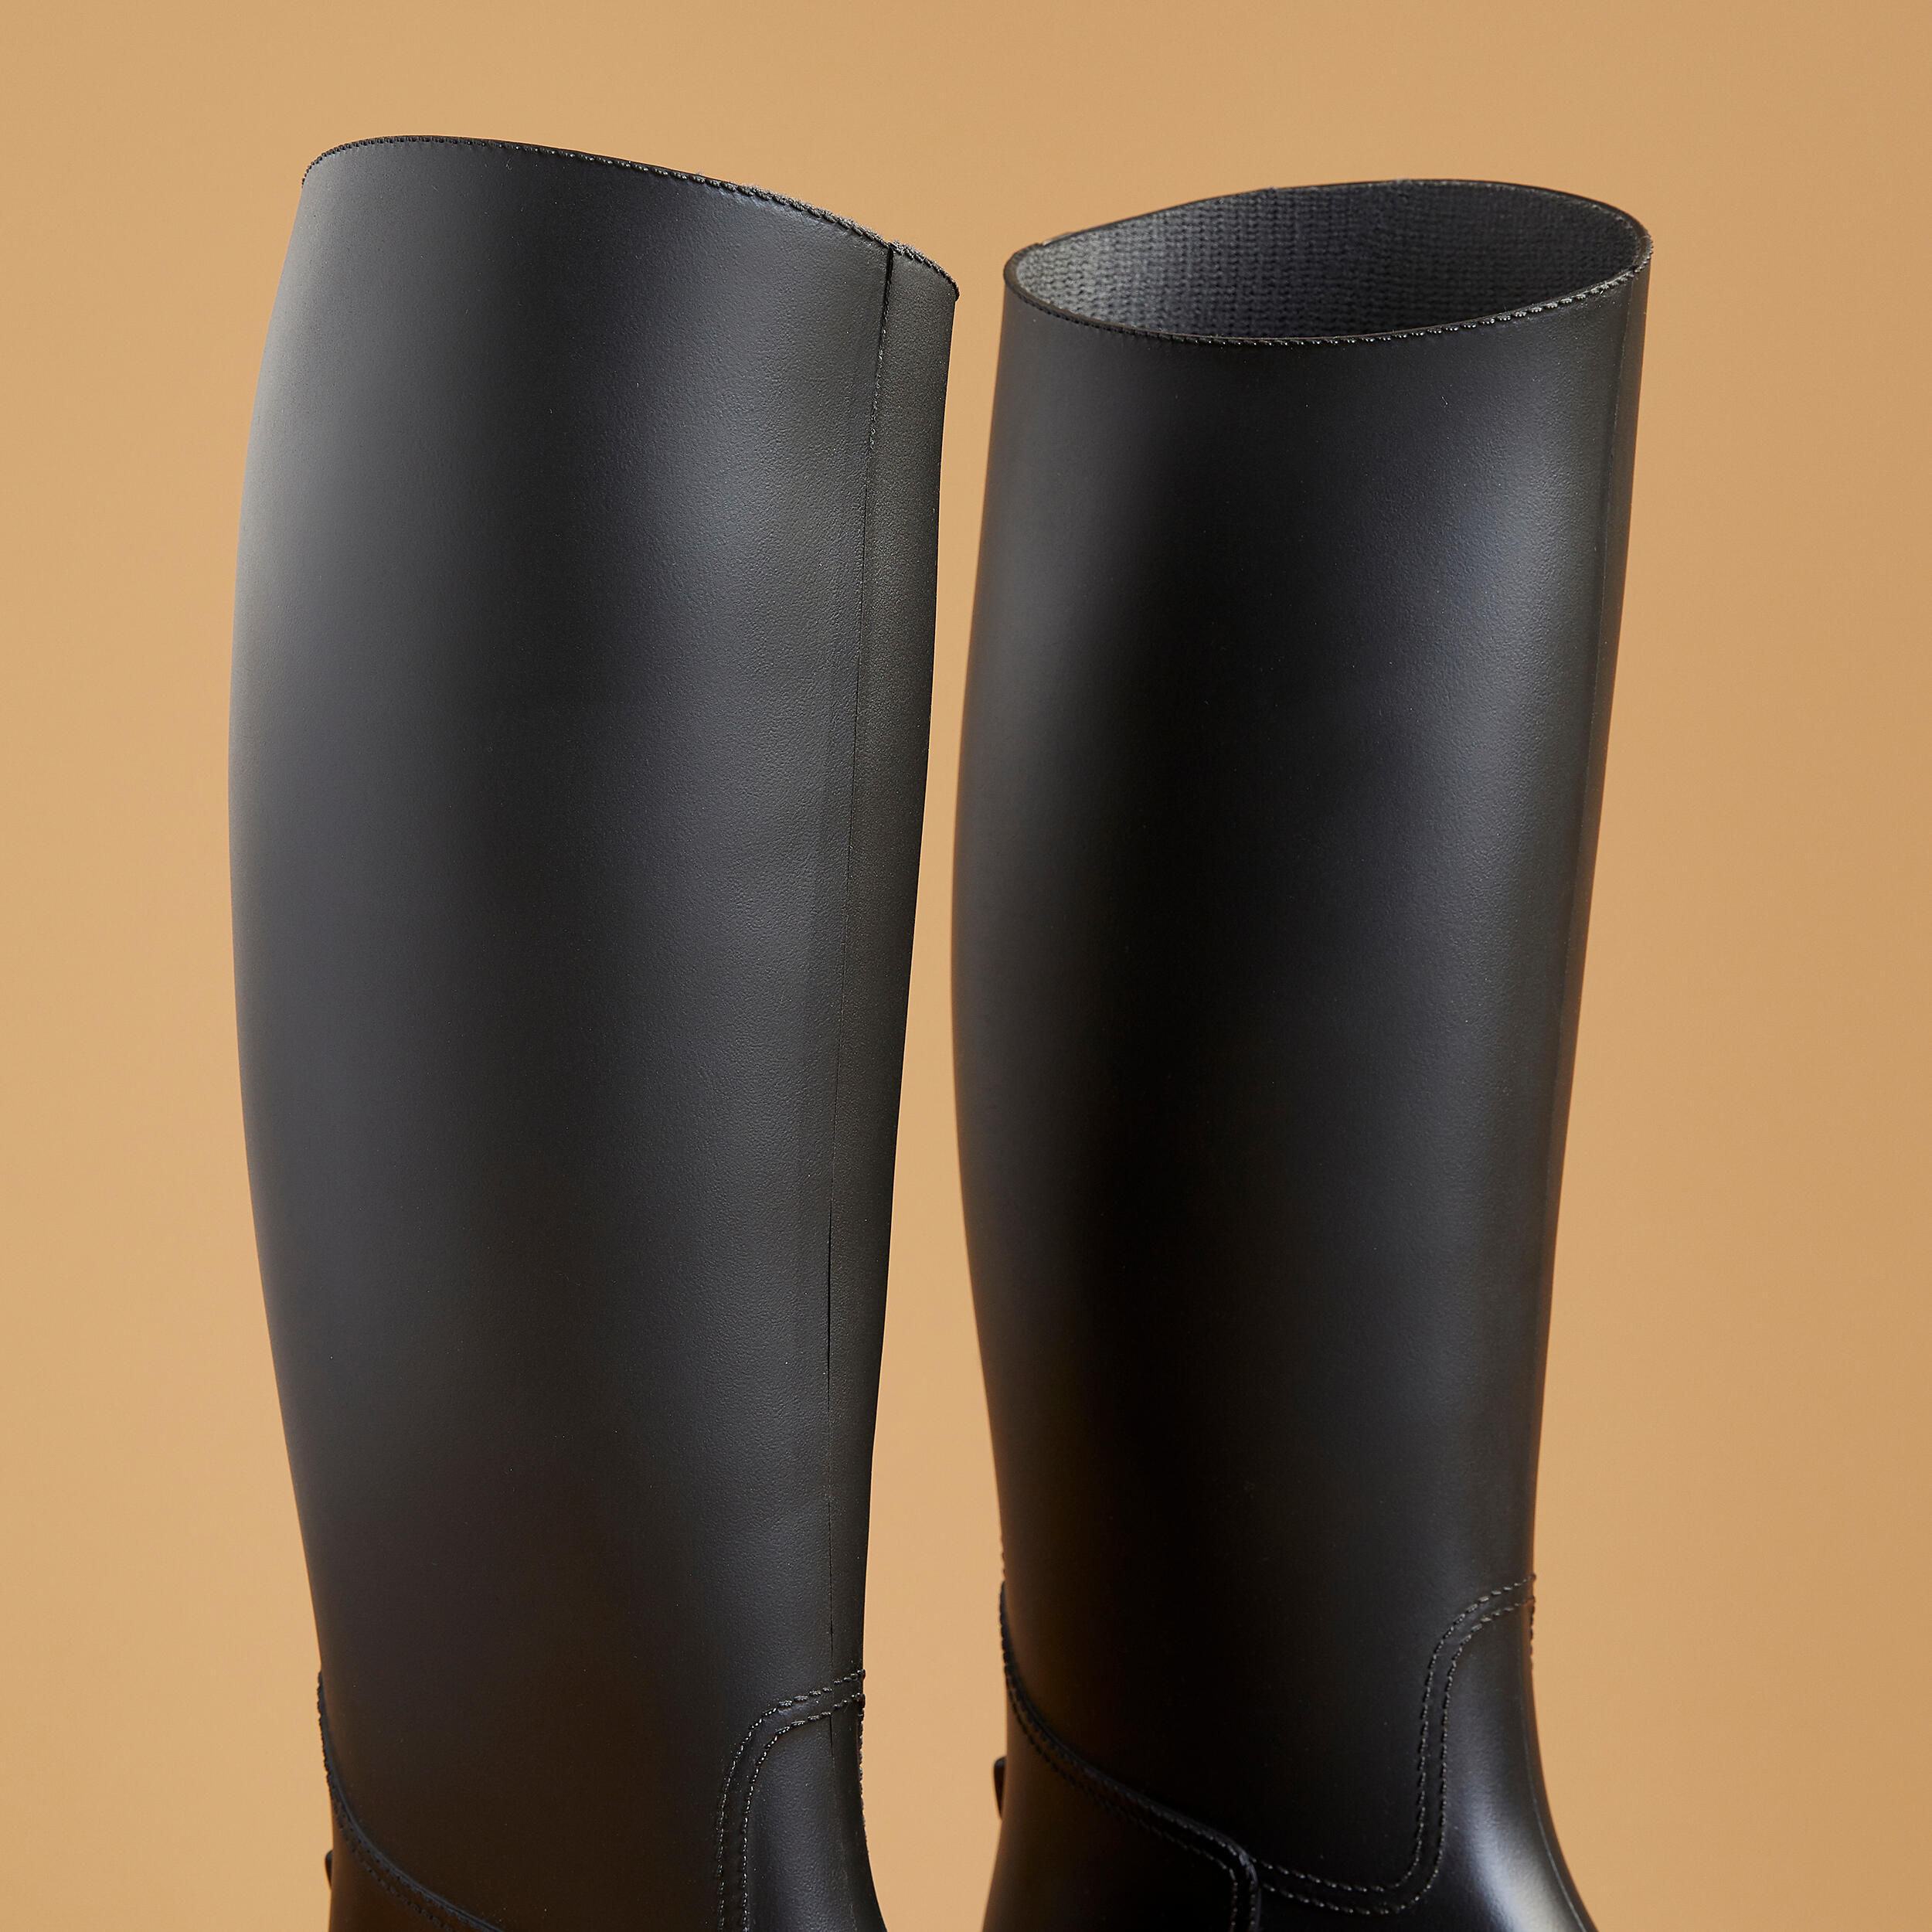 Schooling Adult Horse Riding Long Boots - Black 3/4